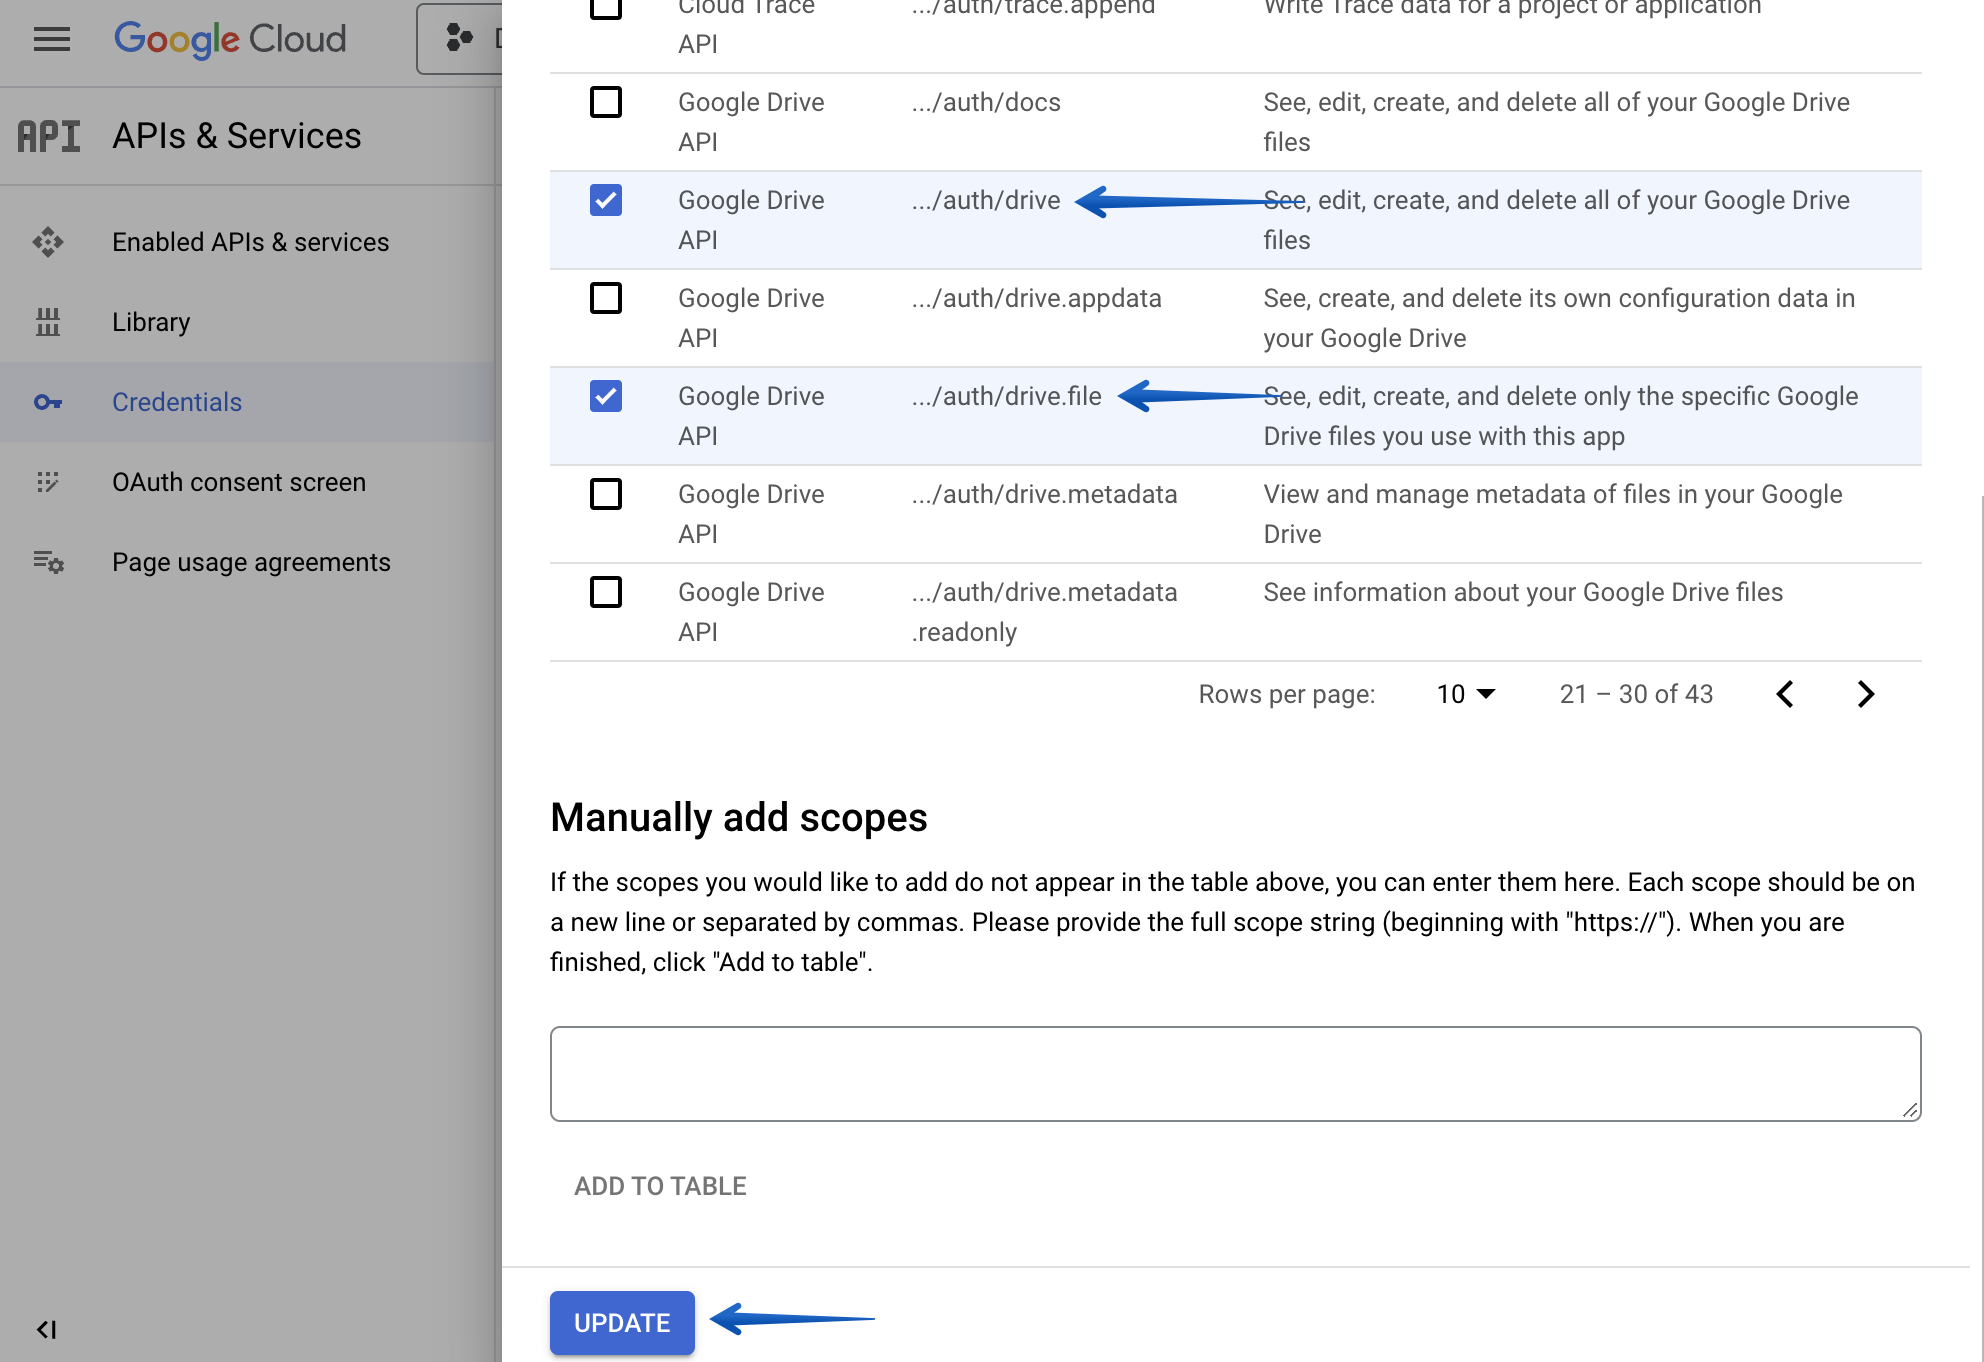 Adding the Google Drive APIs ../auth/drive and ../auth/drive.file